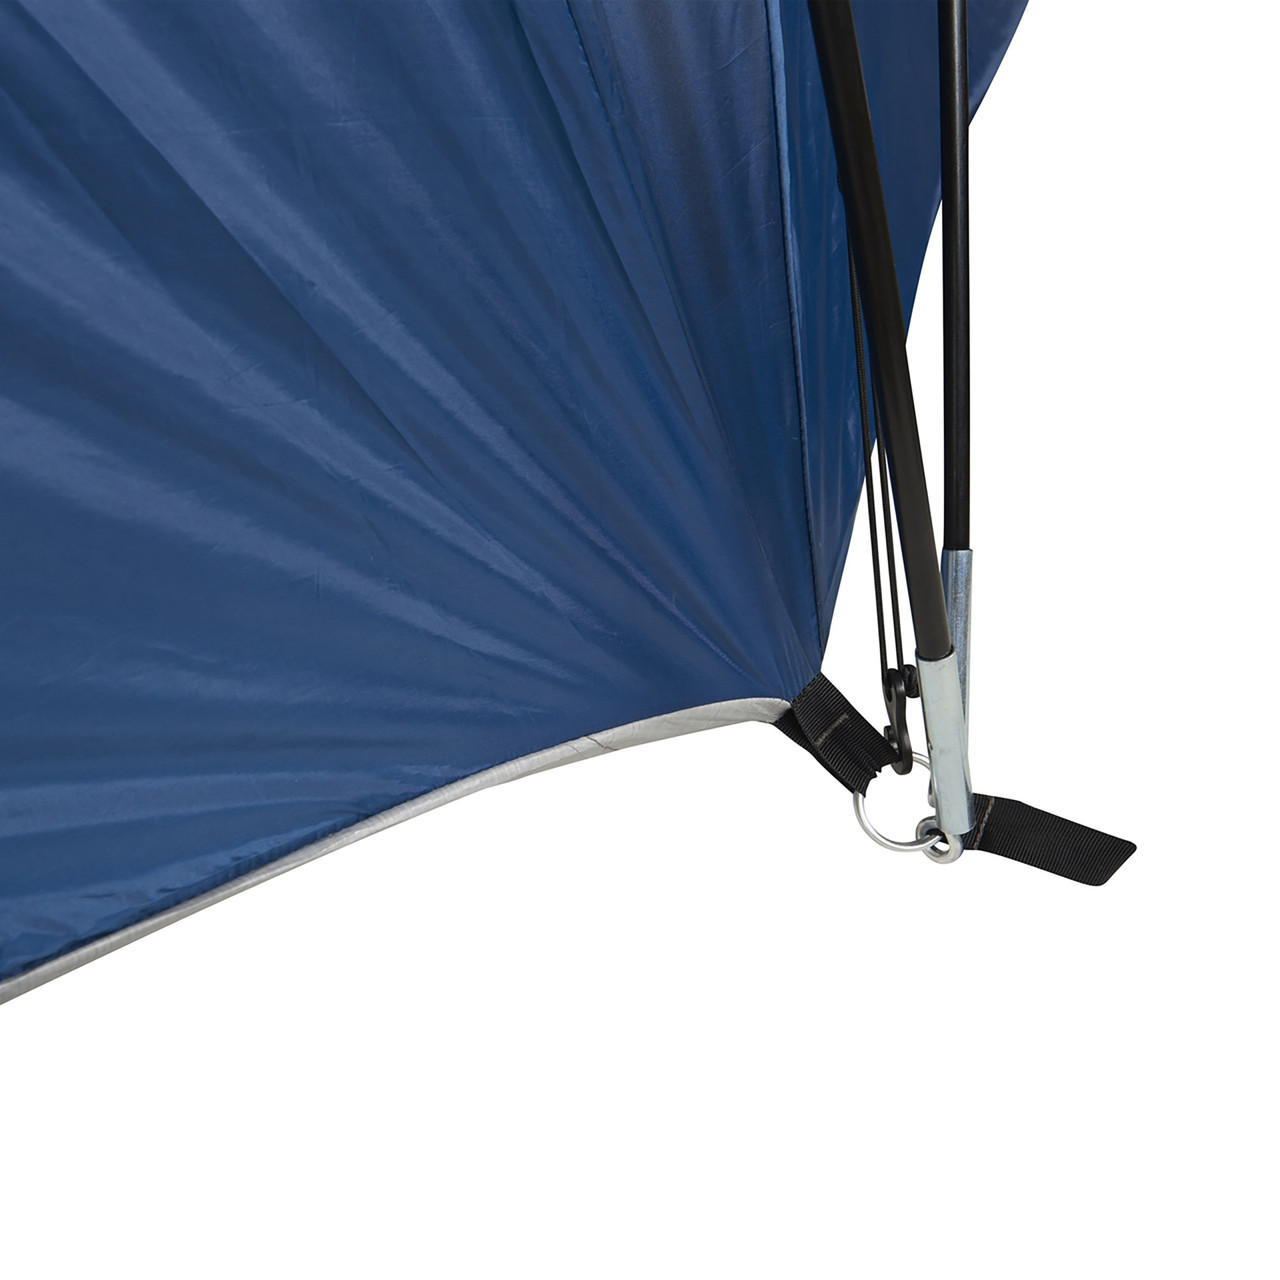 Wenzel Pinyon 10 Person Dome Tent, blue/white, showing tent pole inserted into lower corner of tent